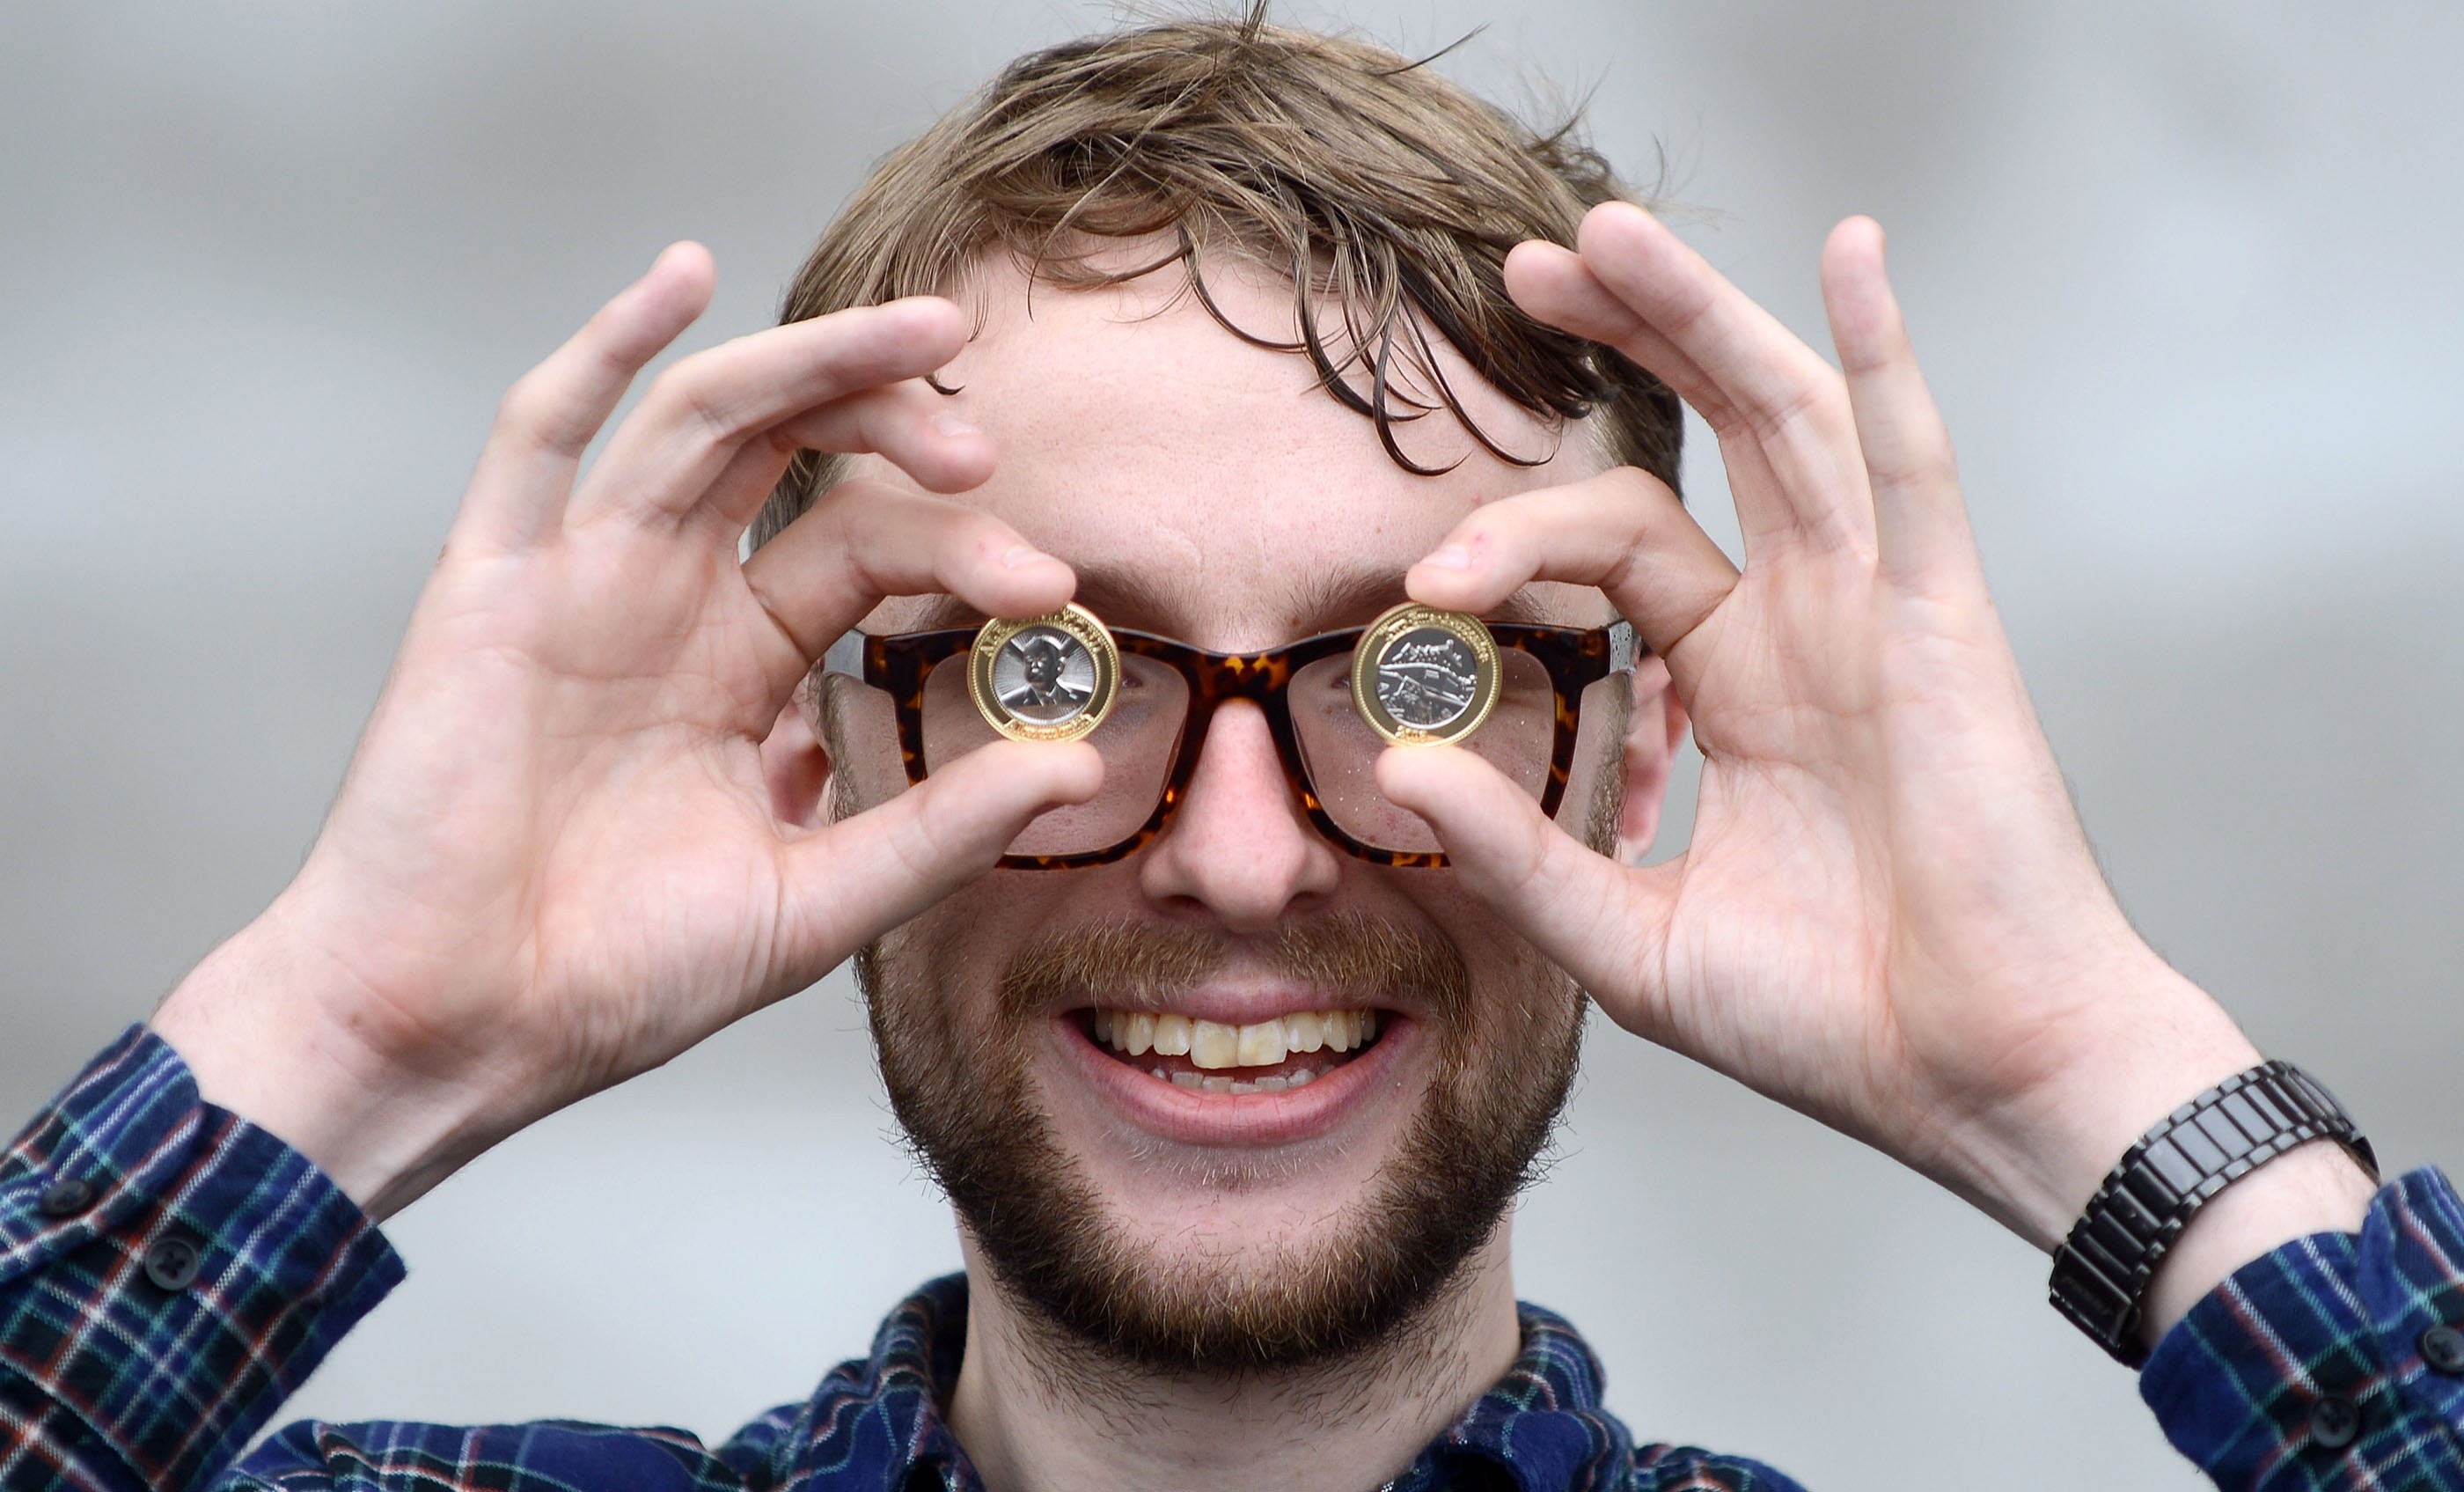 Andrew Paliwoda, 26, from Milngavie, Glasgow, an independence campaigner who has turned a joke currency called the Smackeroonie, invented by comedian Kevin Bridges, into reality 